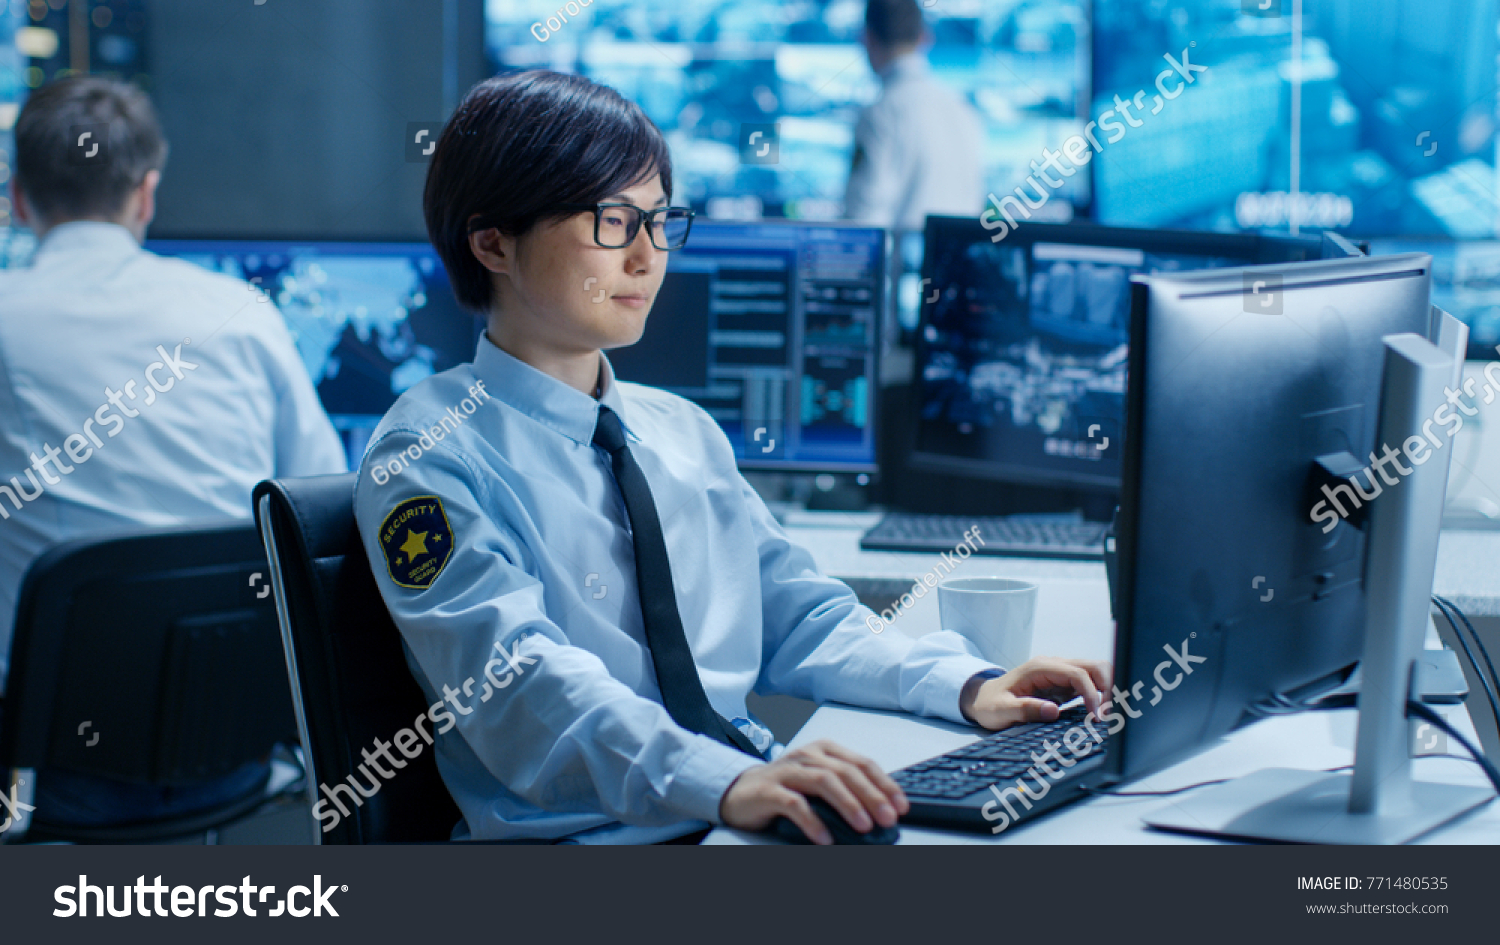 In the Security Command Center Officer at His Workstation Monitors Multiple Screens for Unlawful Infiltration. They're Guarding Important International Logistics Facility. #771480535